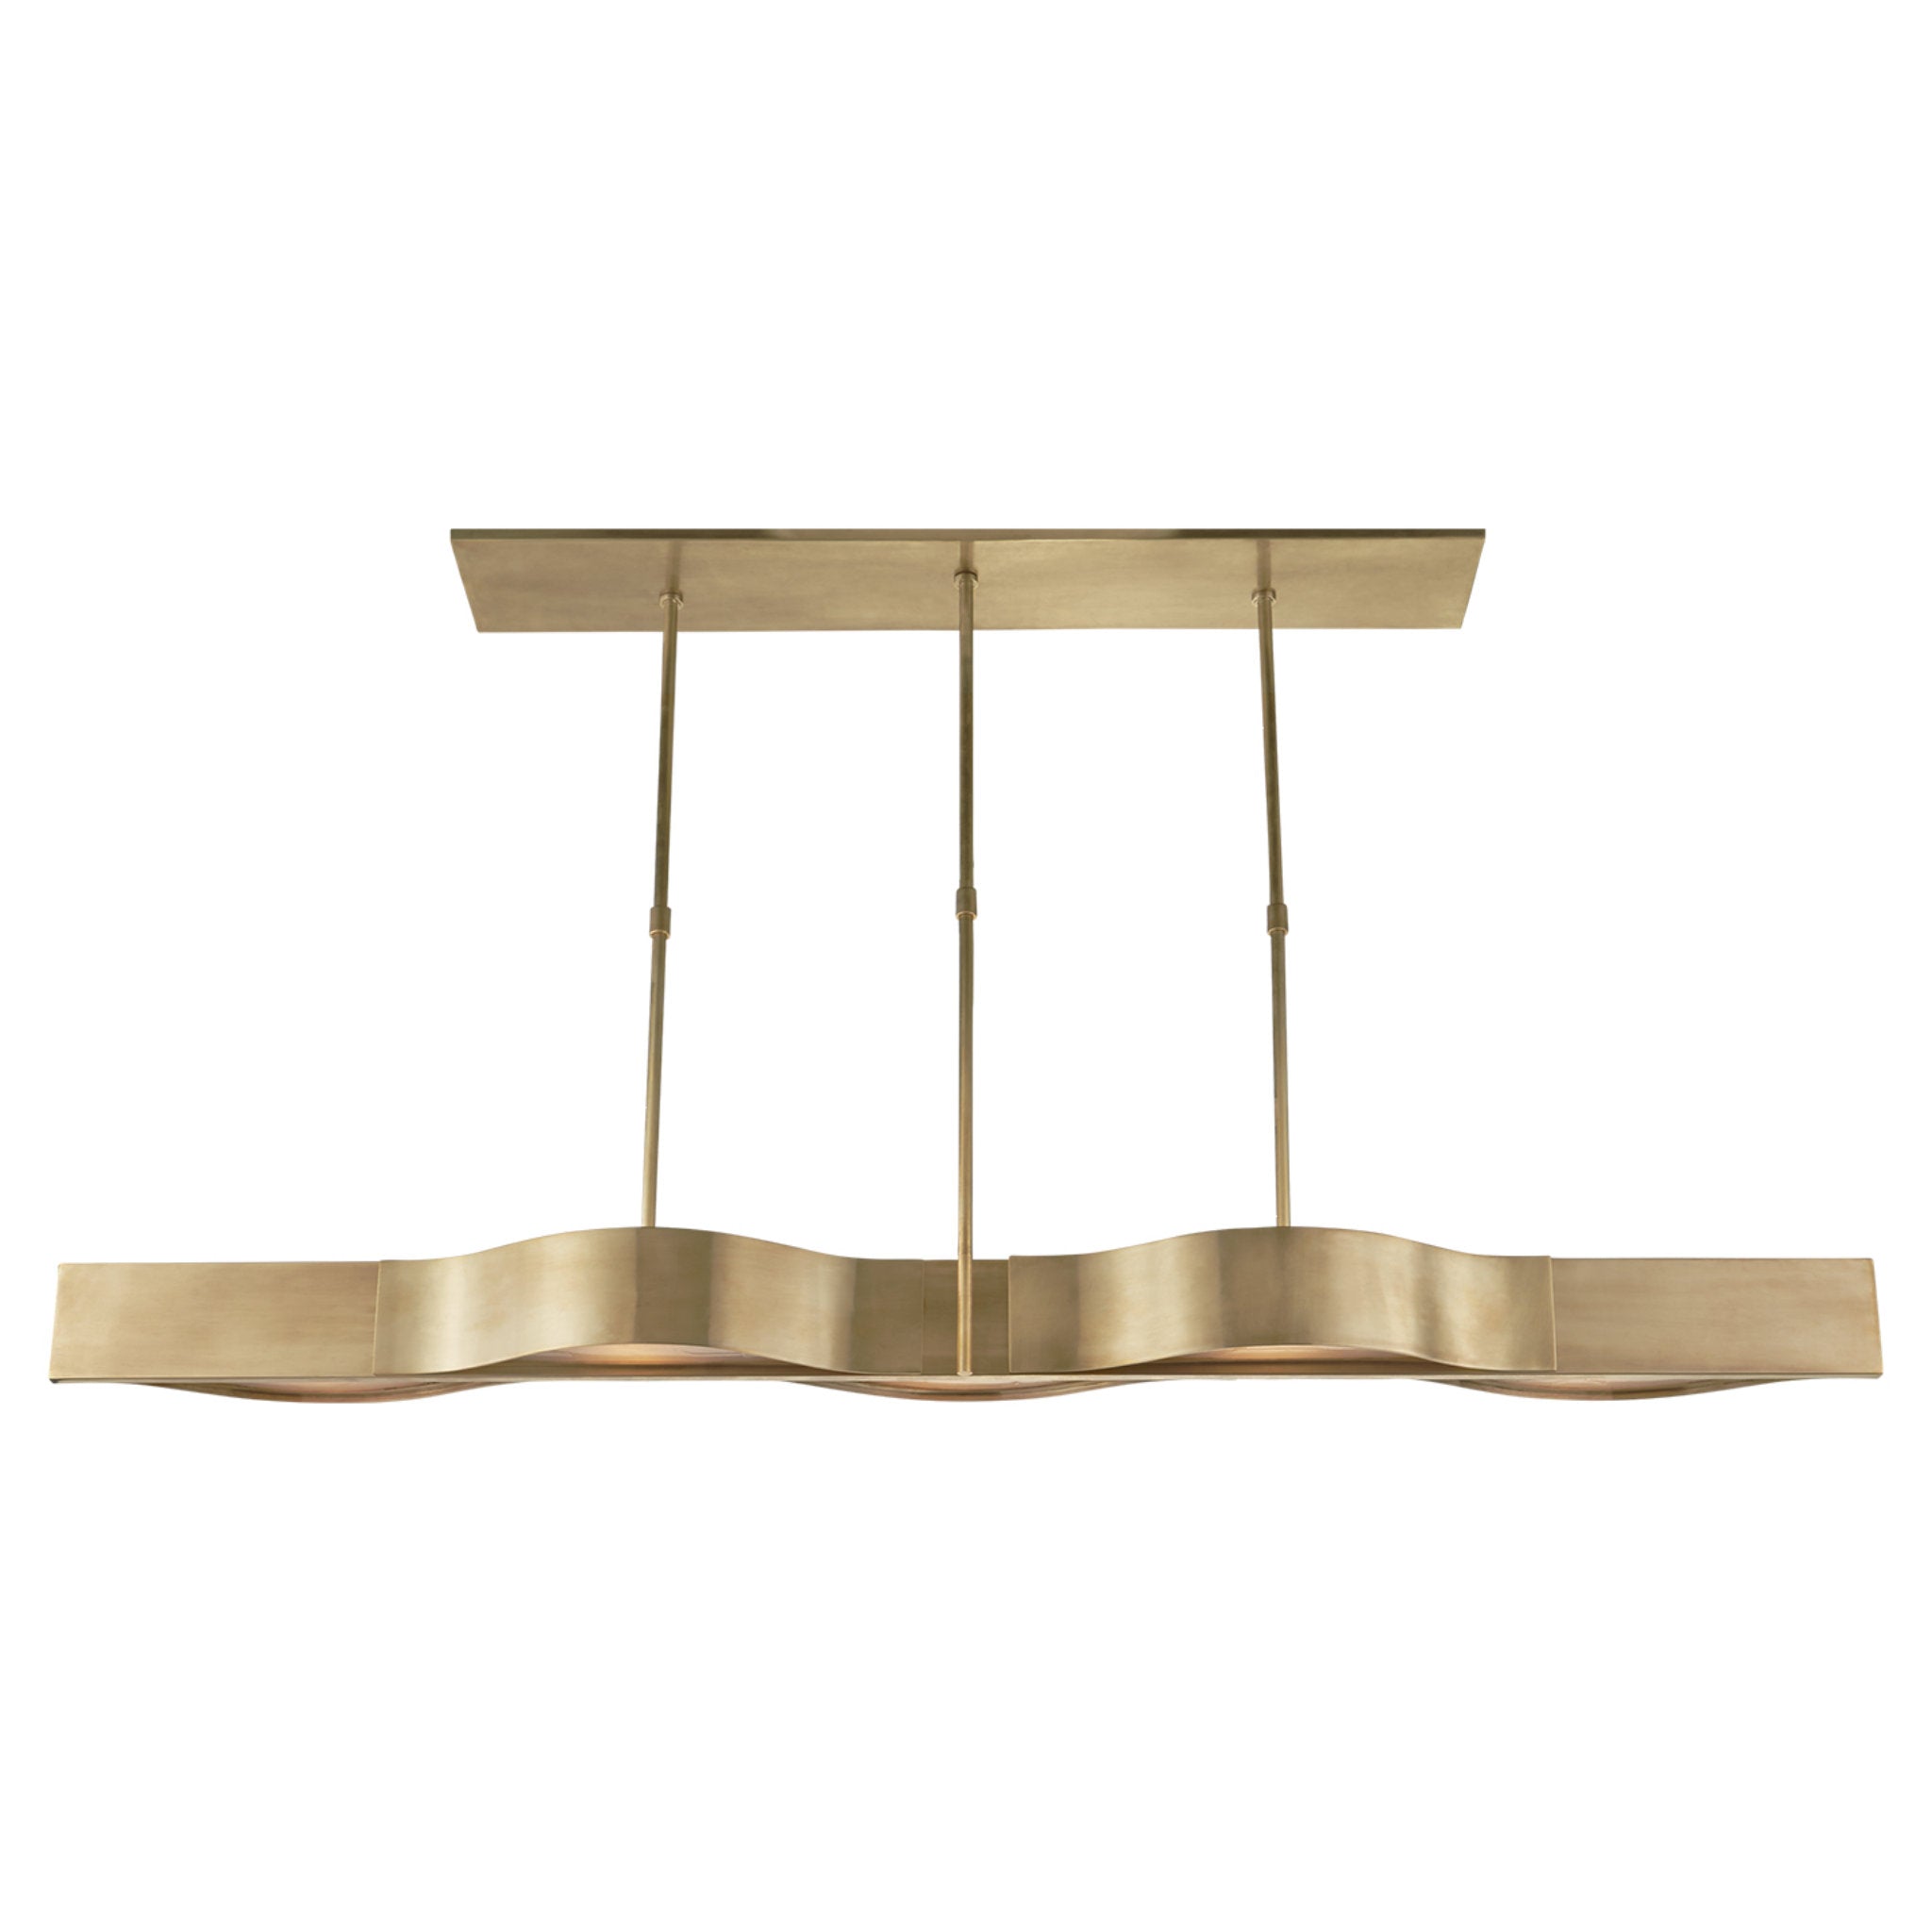 Kelly Wearstler Avant Large Linear Pendant in Antique-Burnished Brass with Frosted Glass